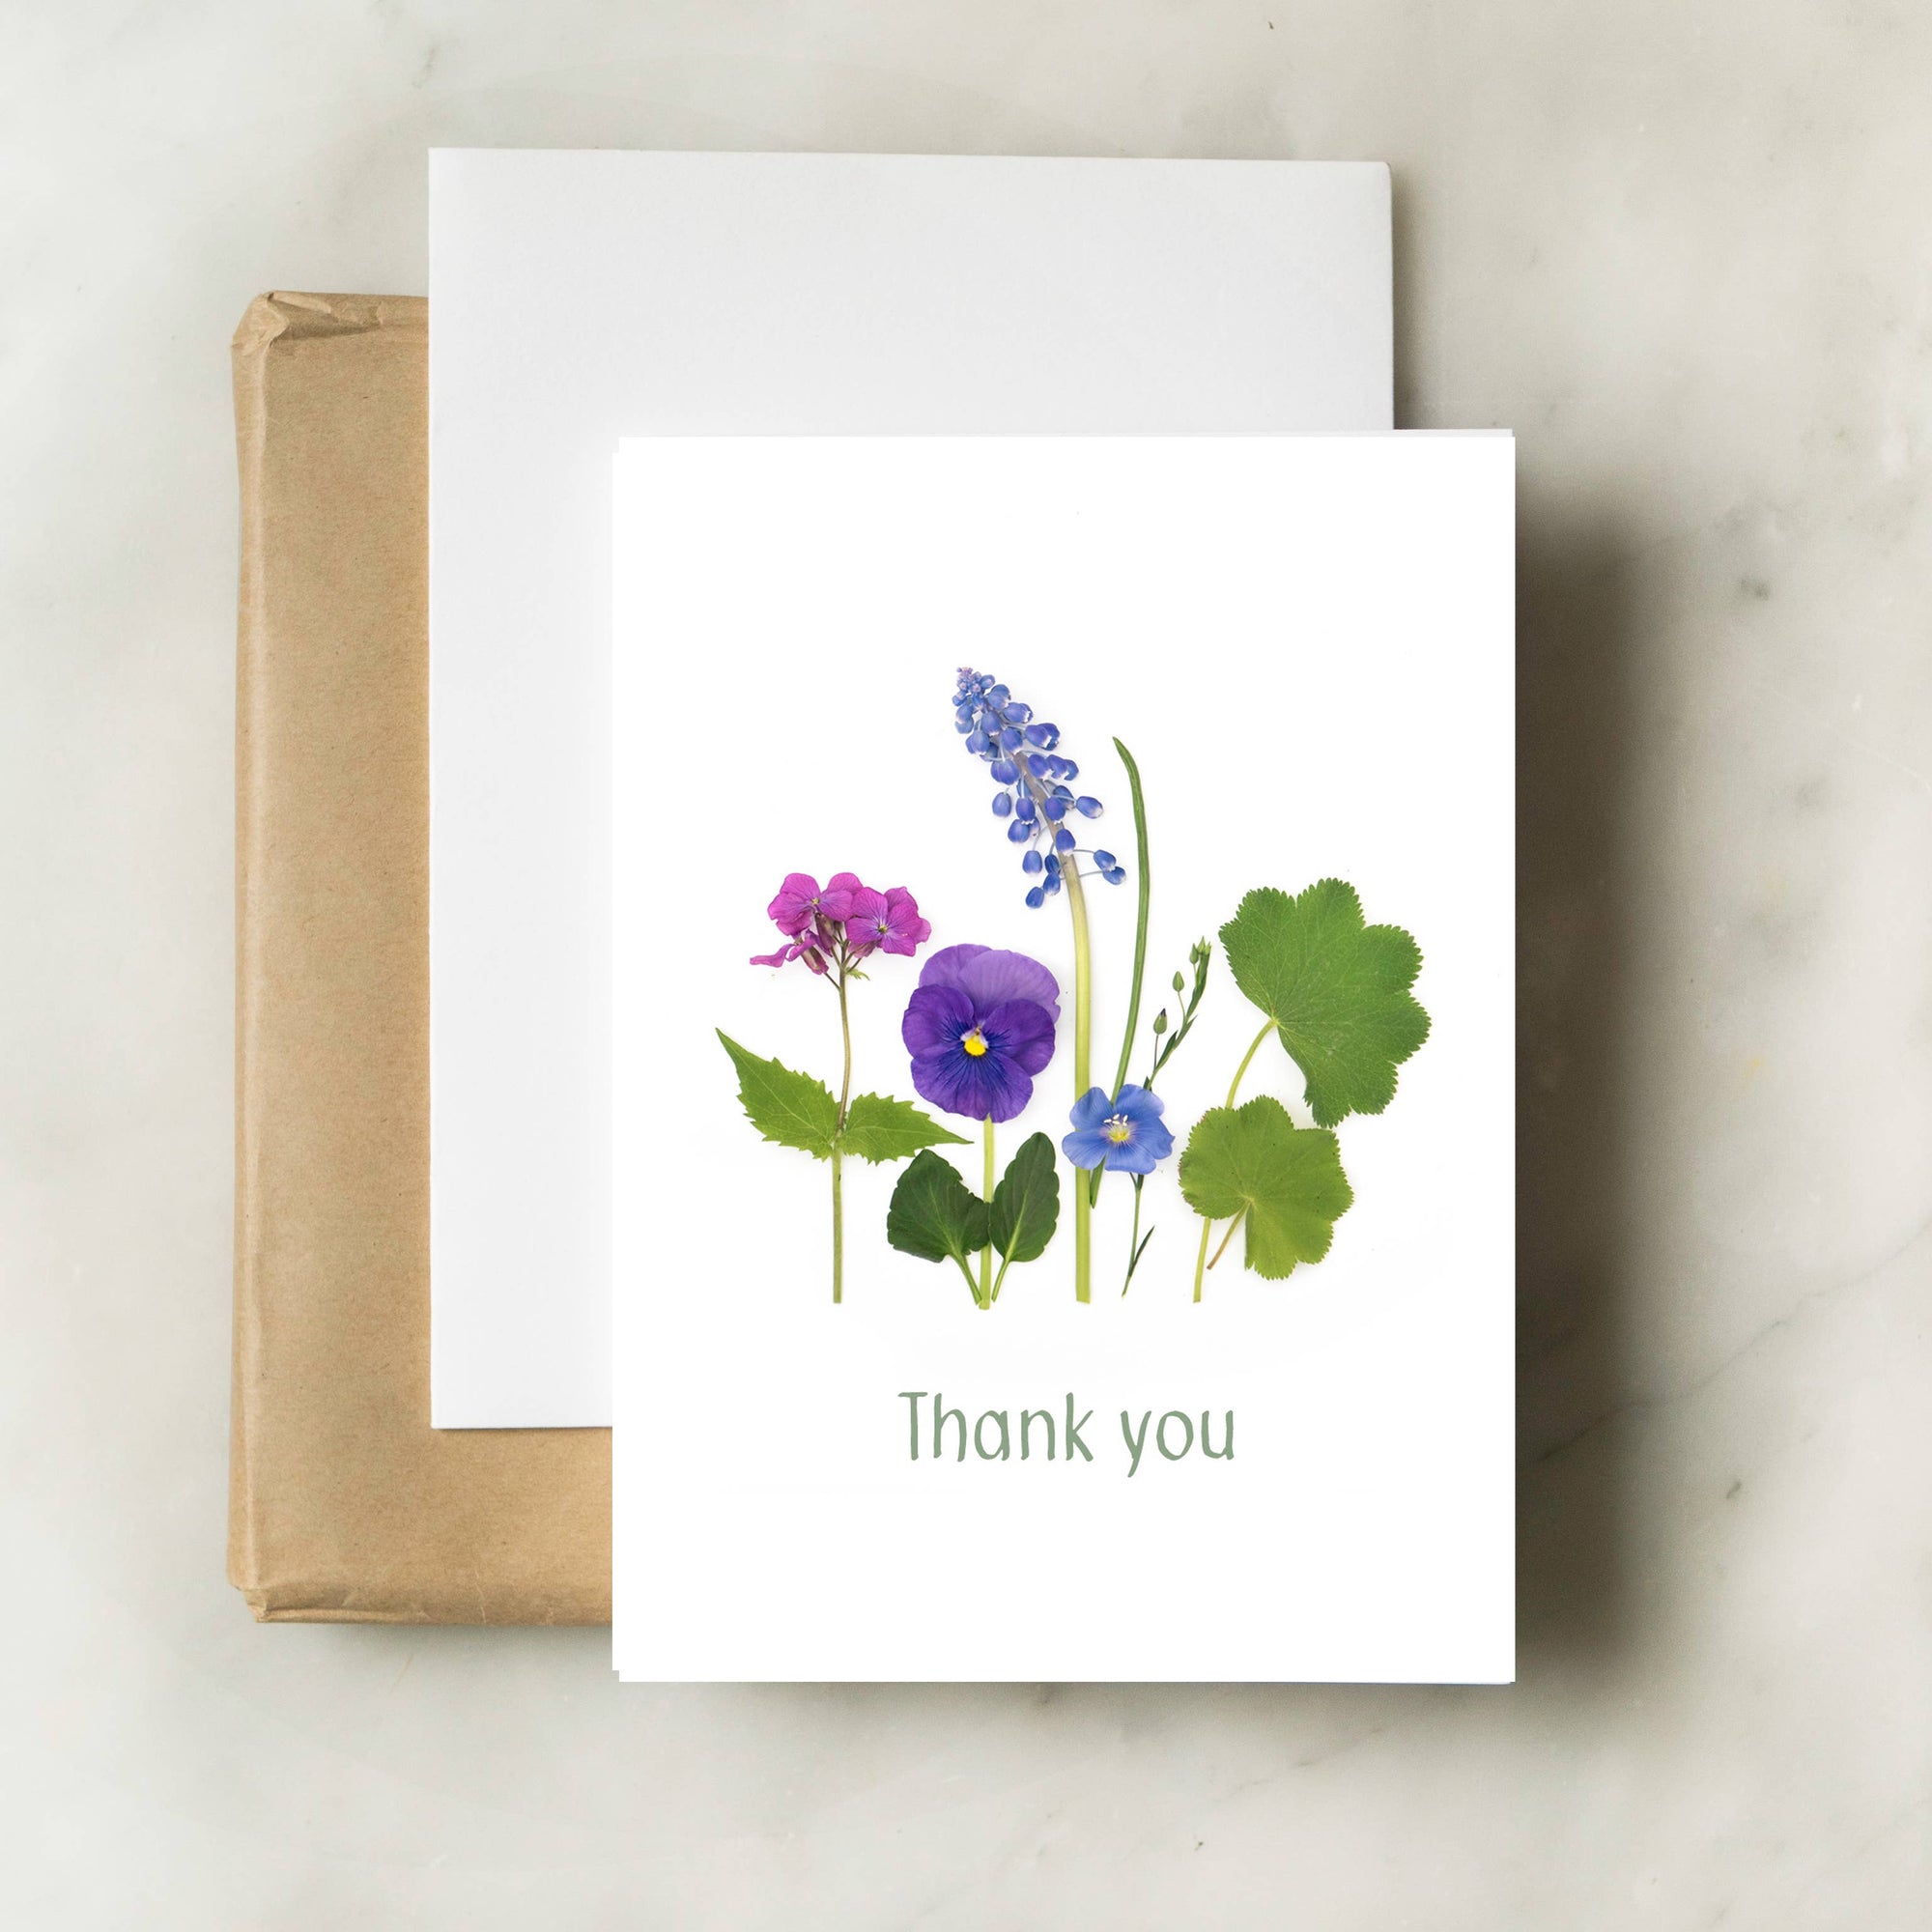 Thank You Card - Blue flax and friends